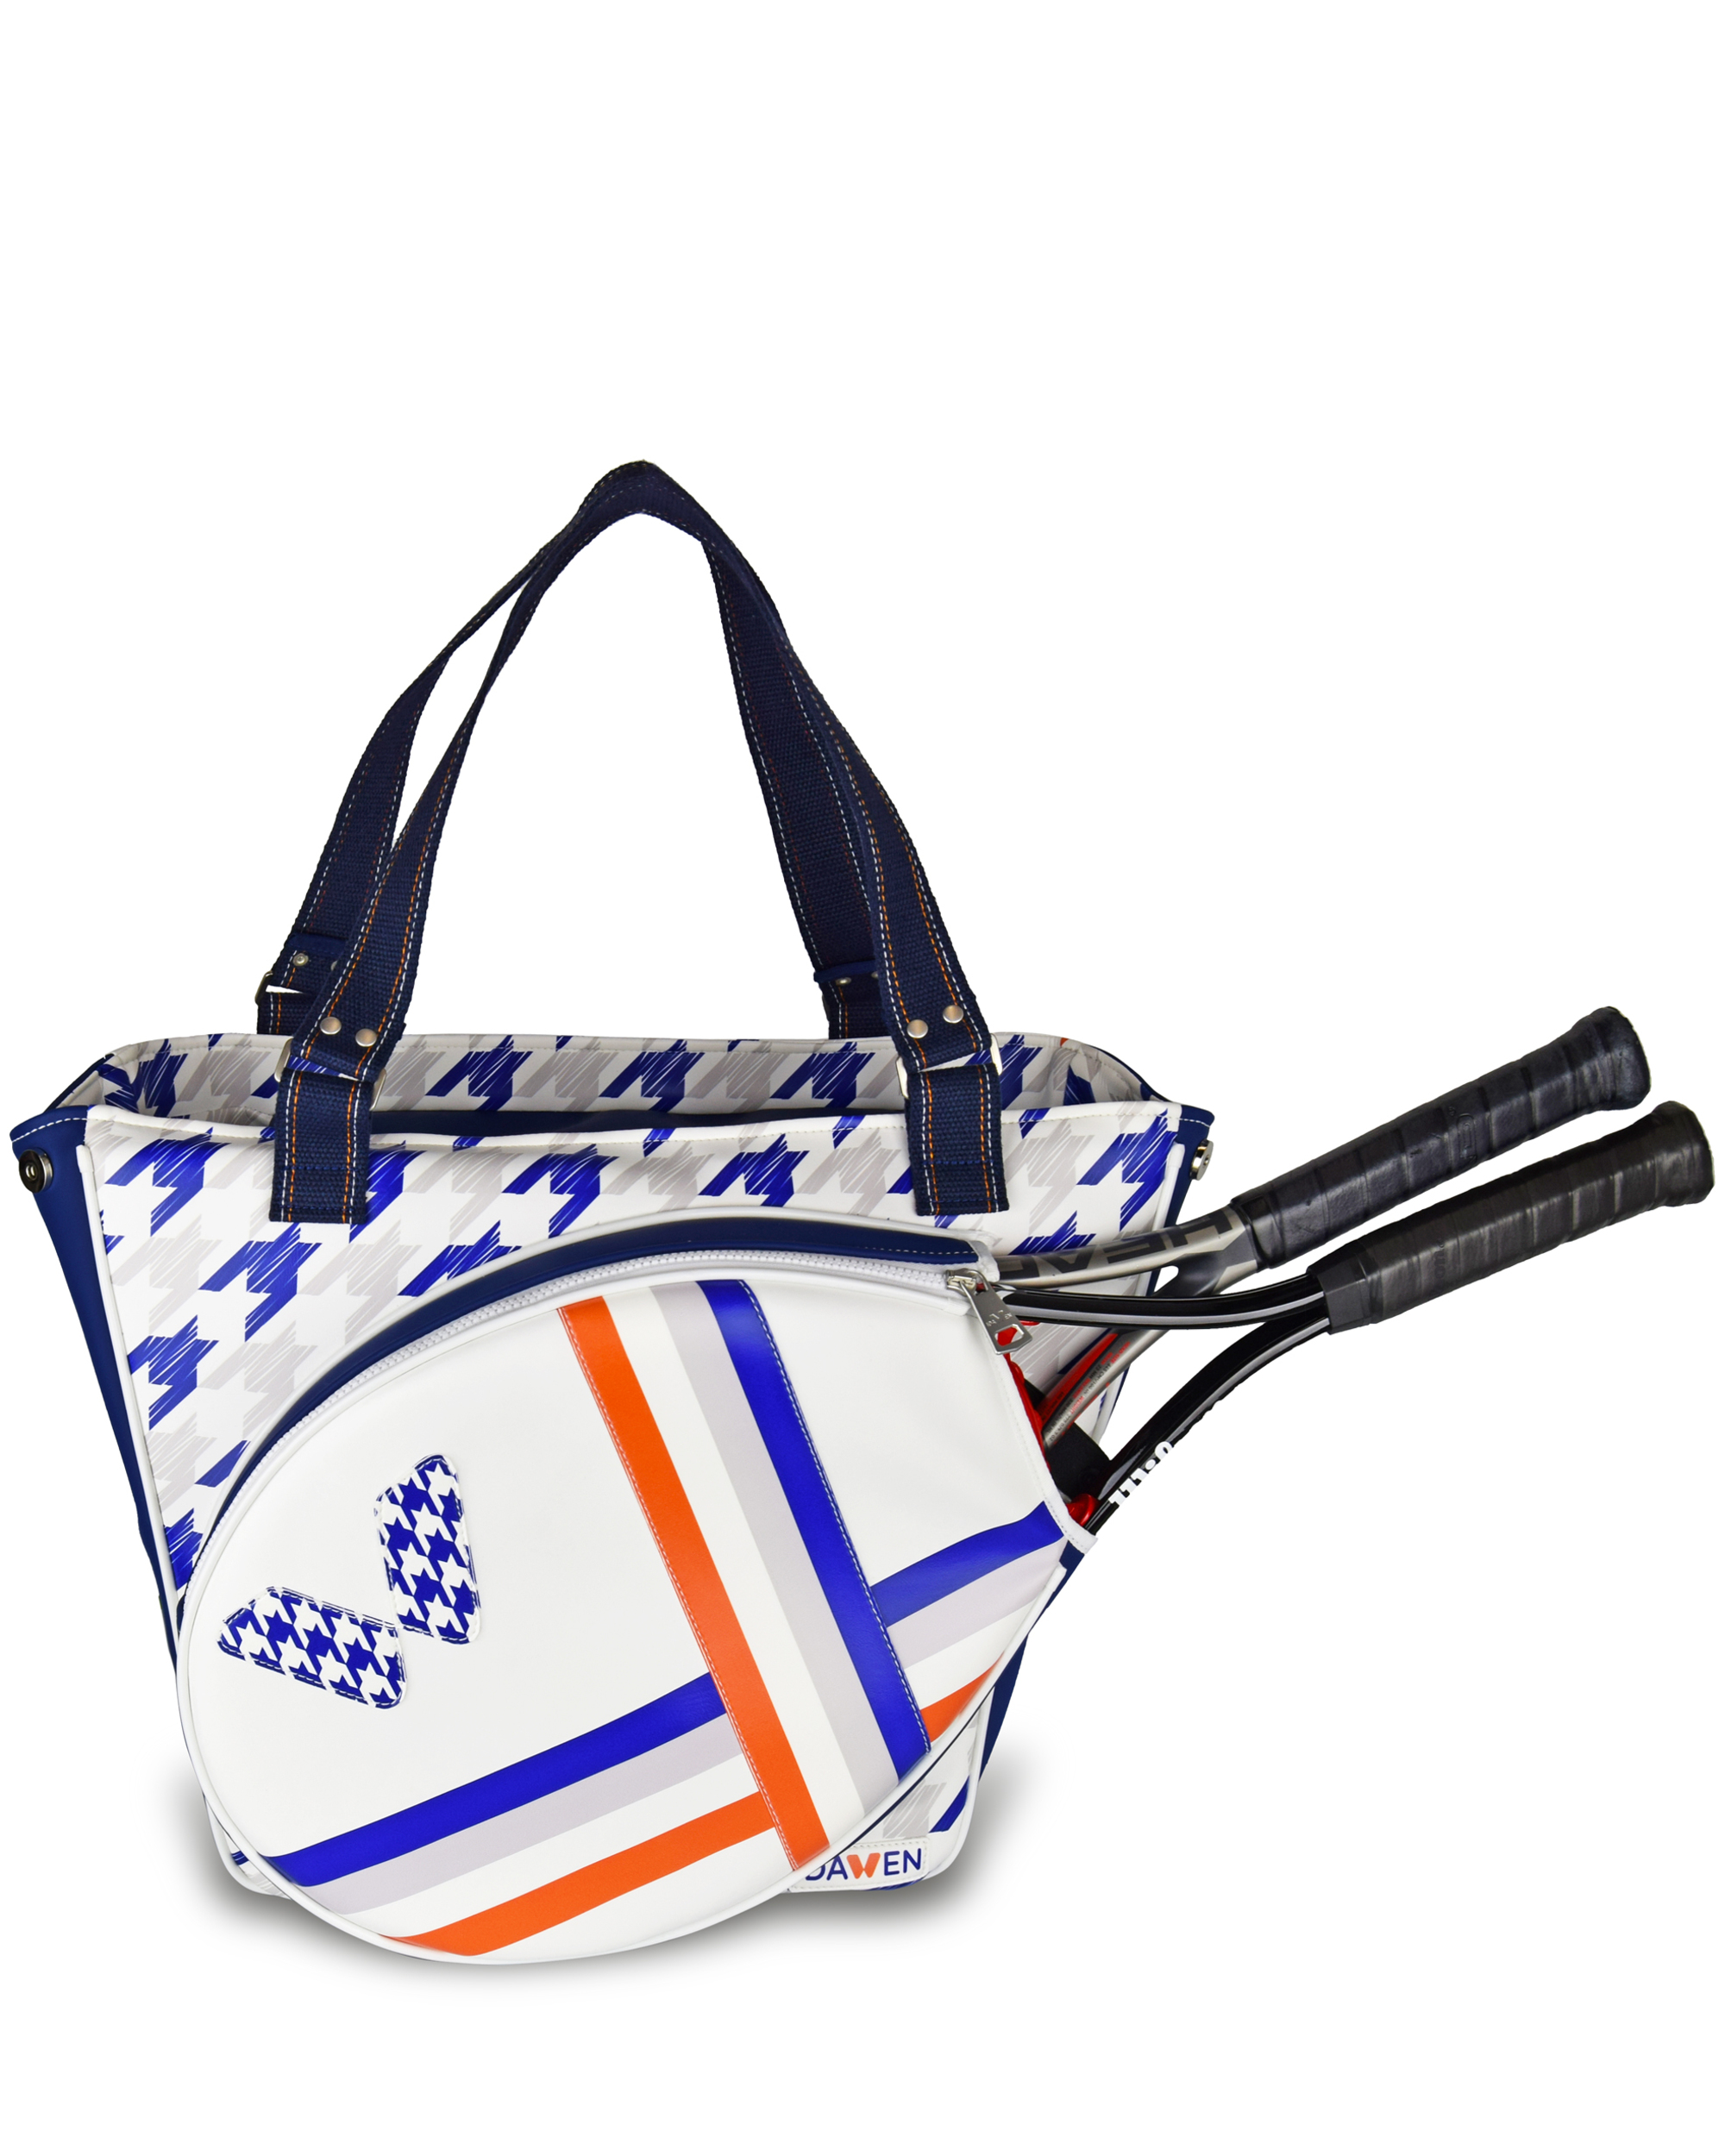 TENNIS BAG FOR WOMAN HOUNDSTOOTH PRINT